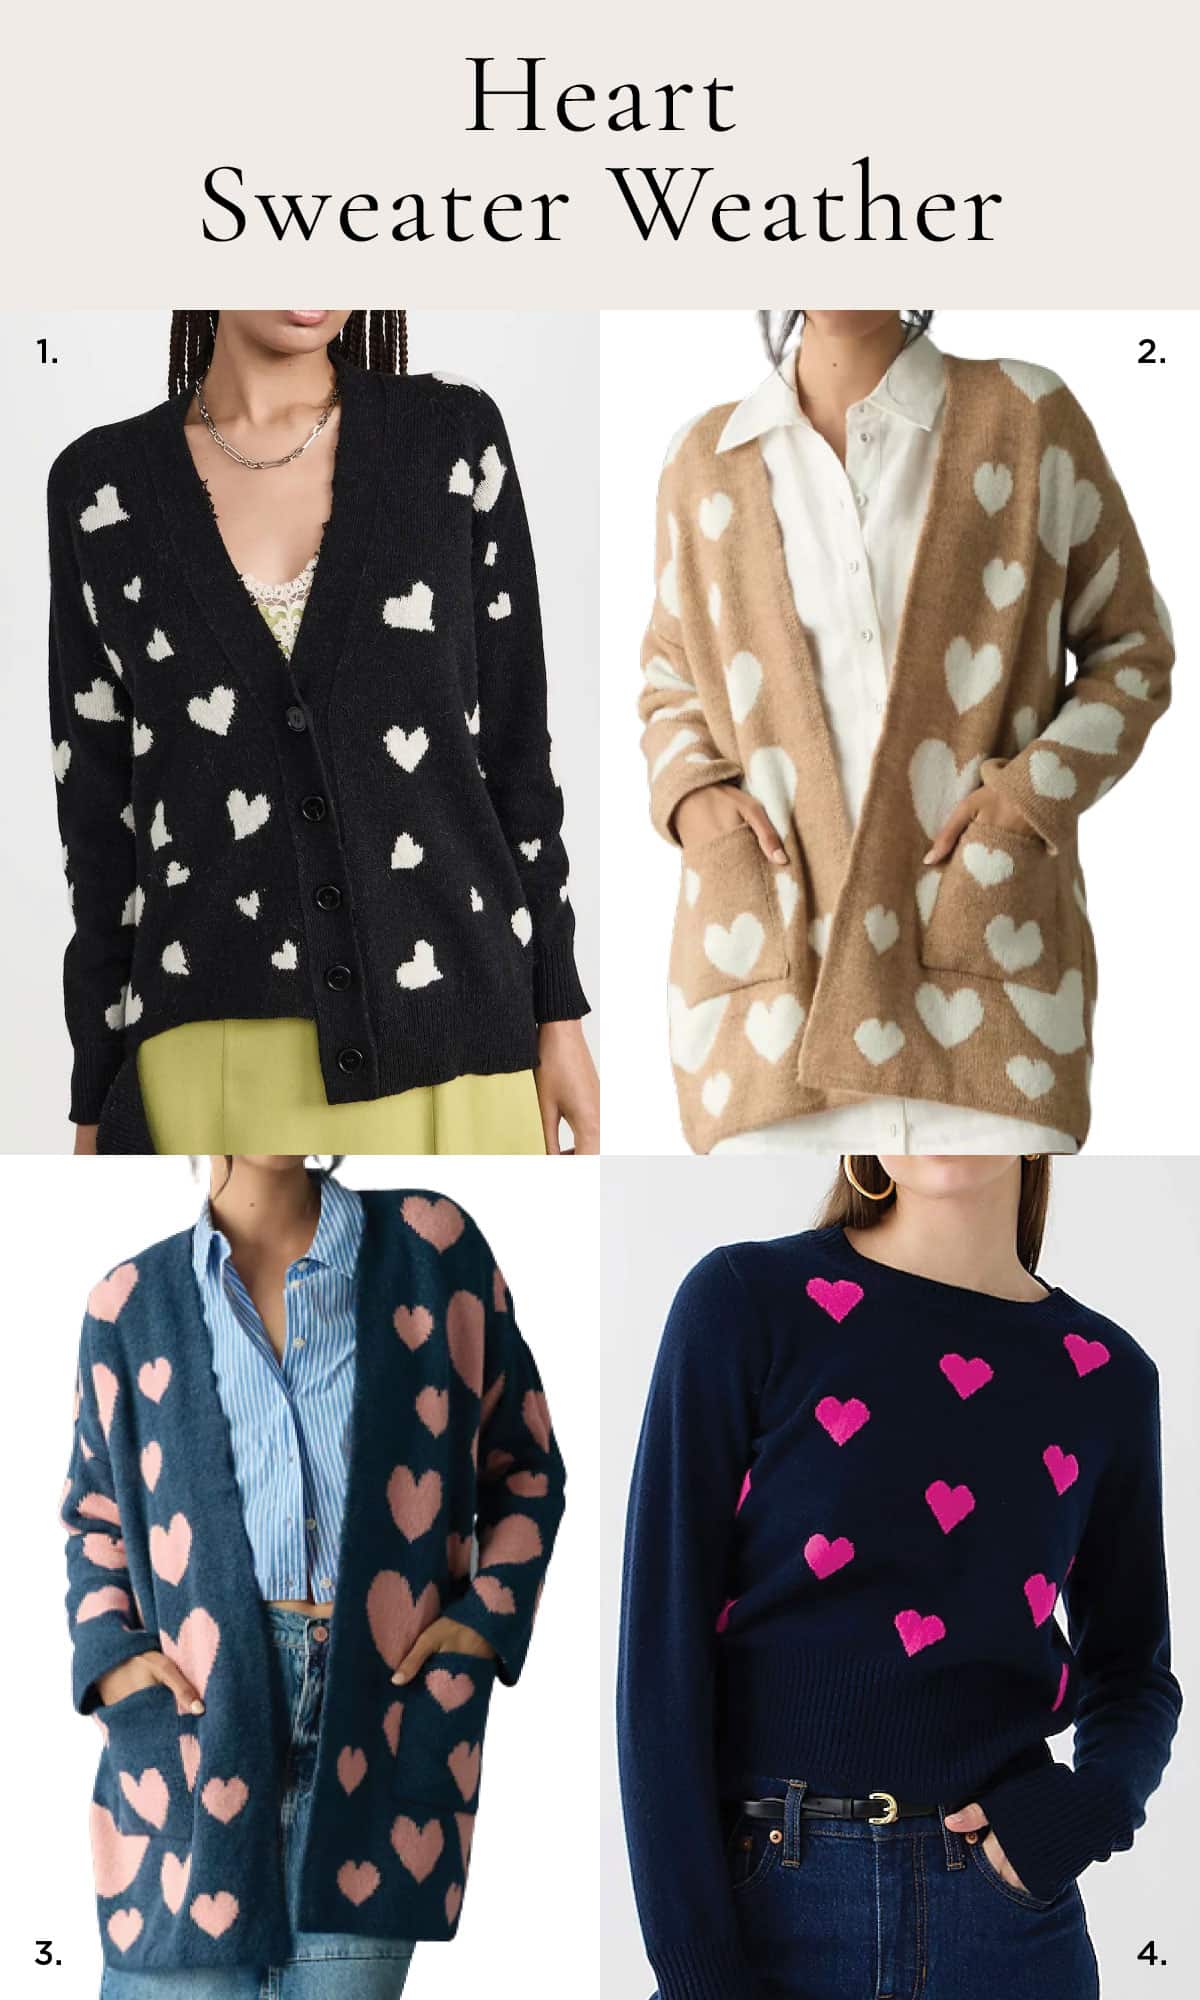 Heart Cardigan Sweaters - love the heart covered cardigans with their loose fit cozy feel